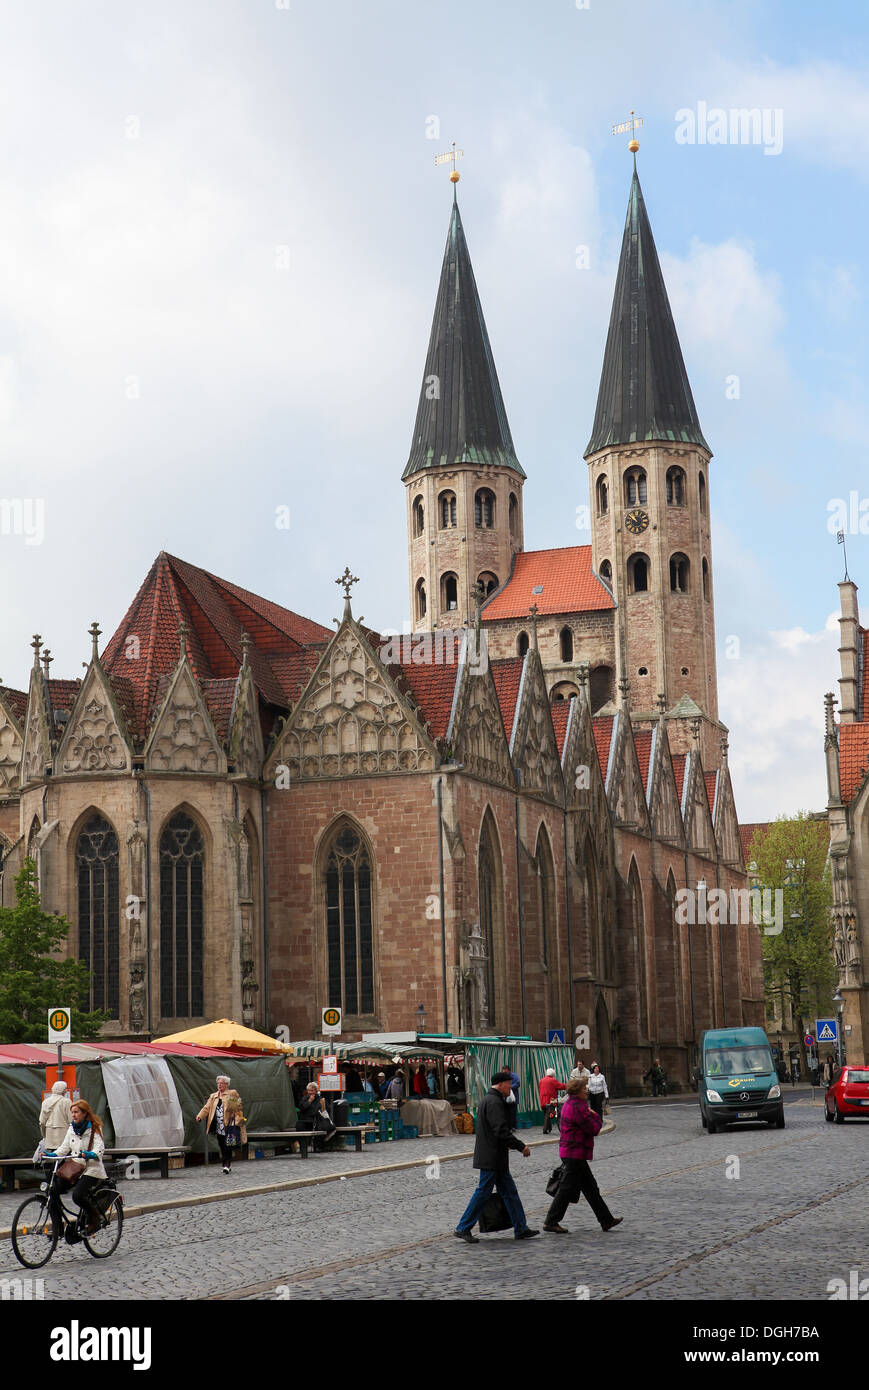 Unidentified people passing in front of the Martini church in Braunschweig, Niedersachsen, Germany, on May 4, 2011. Stock Photo